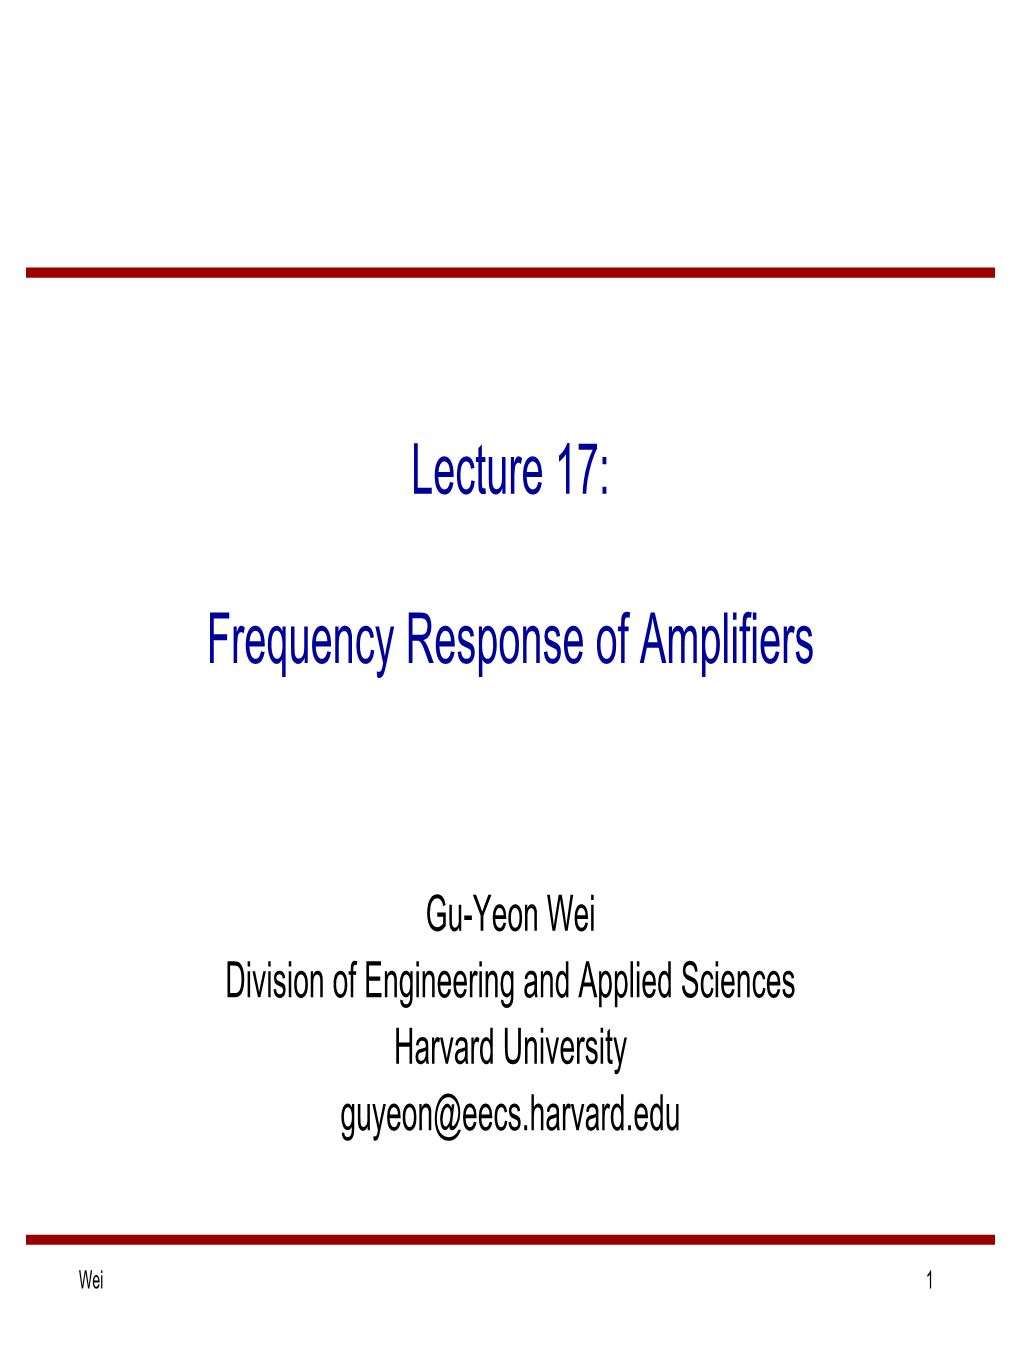 Lecture 17: Frequency Response of Amplifiers